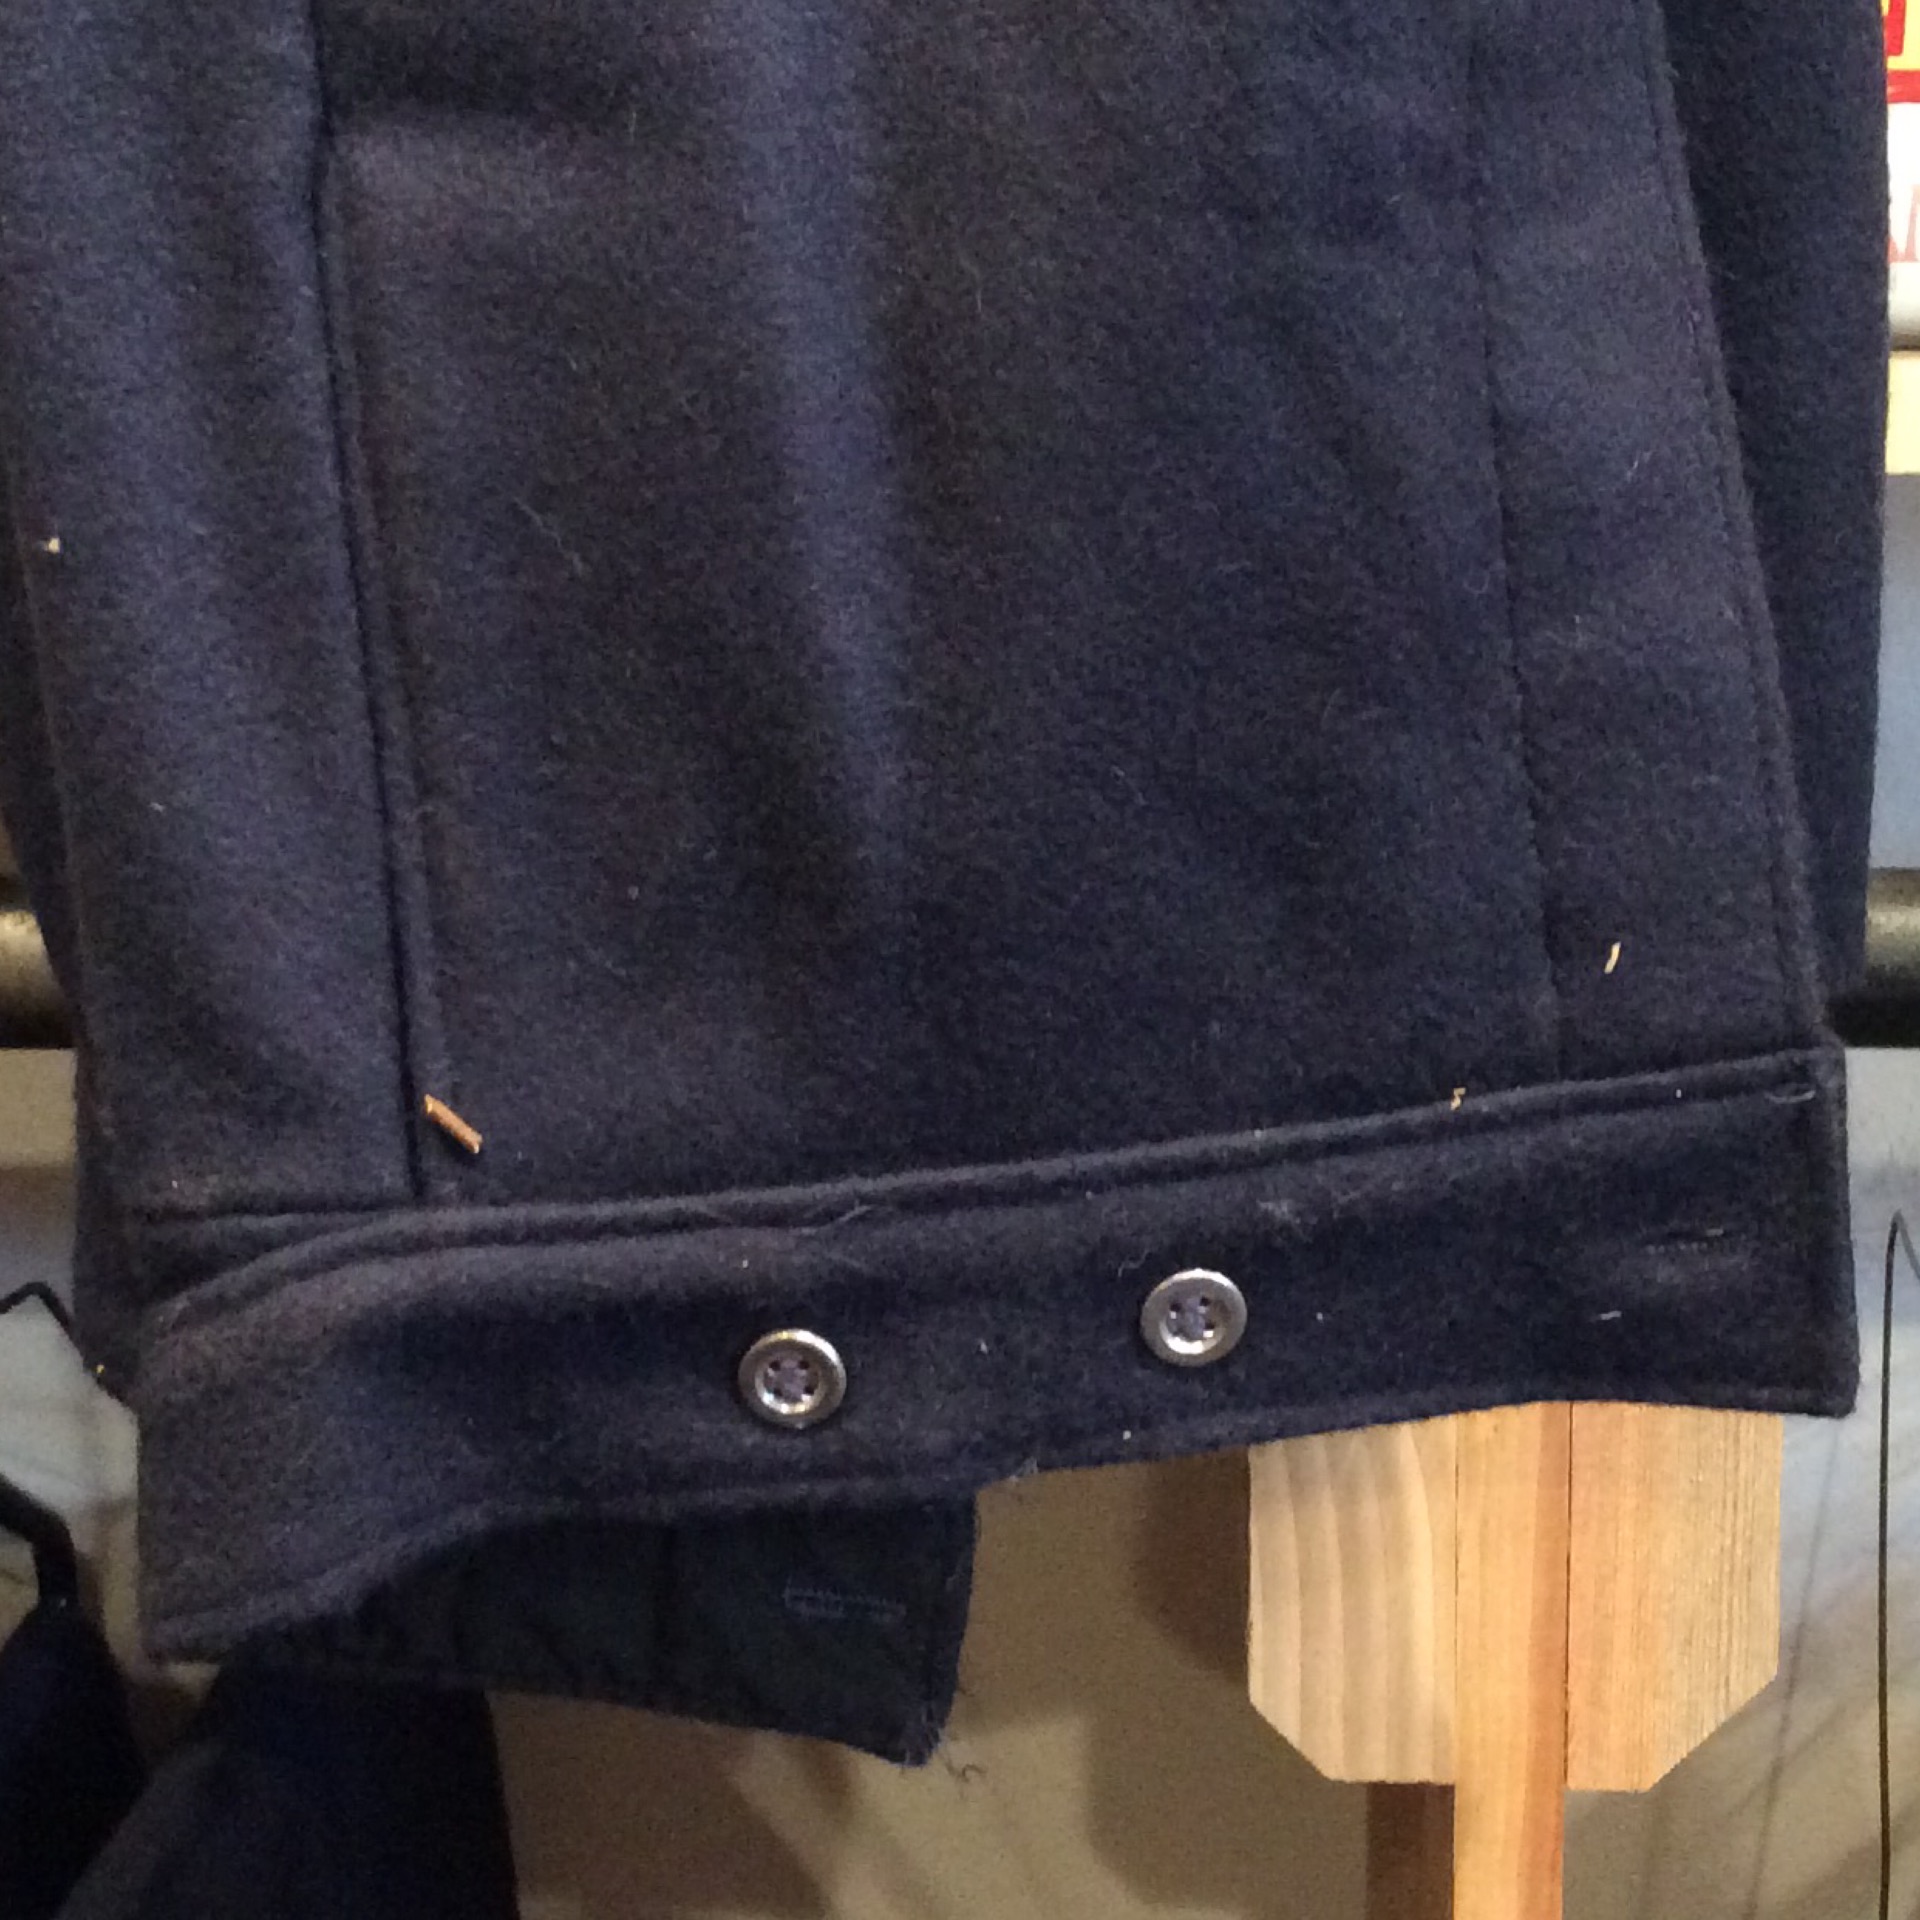 Trousers, Wool Navy Blue - The Maryland Sutler